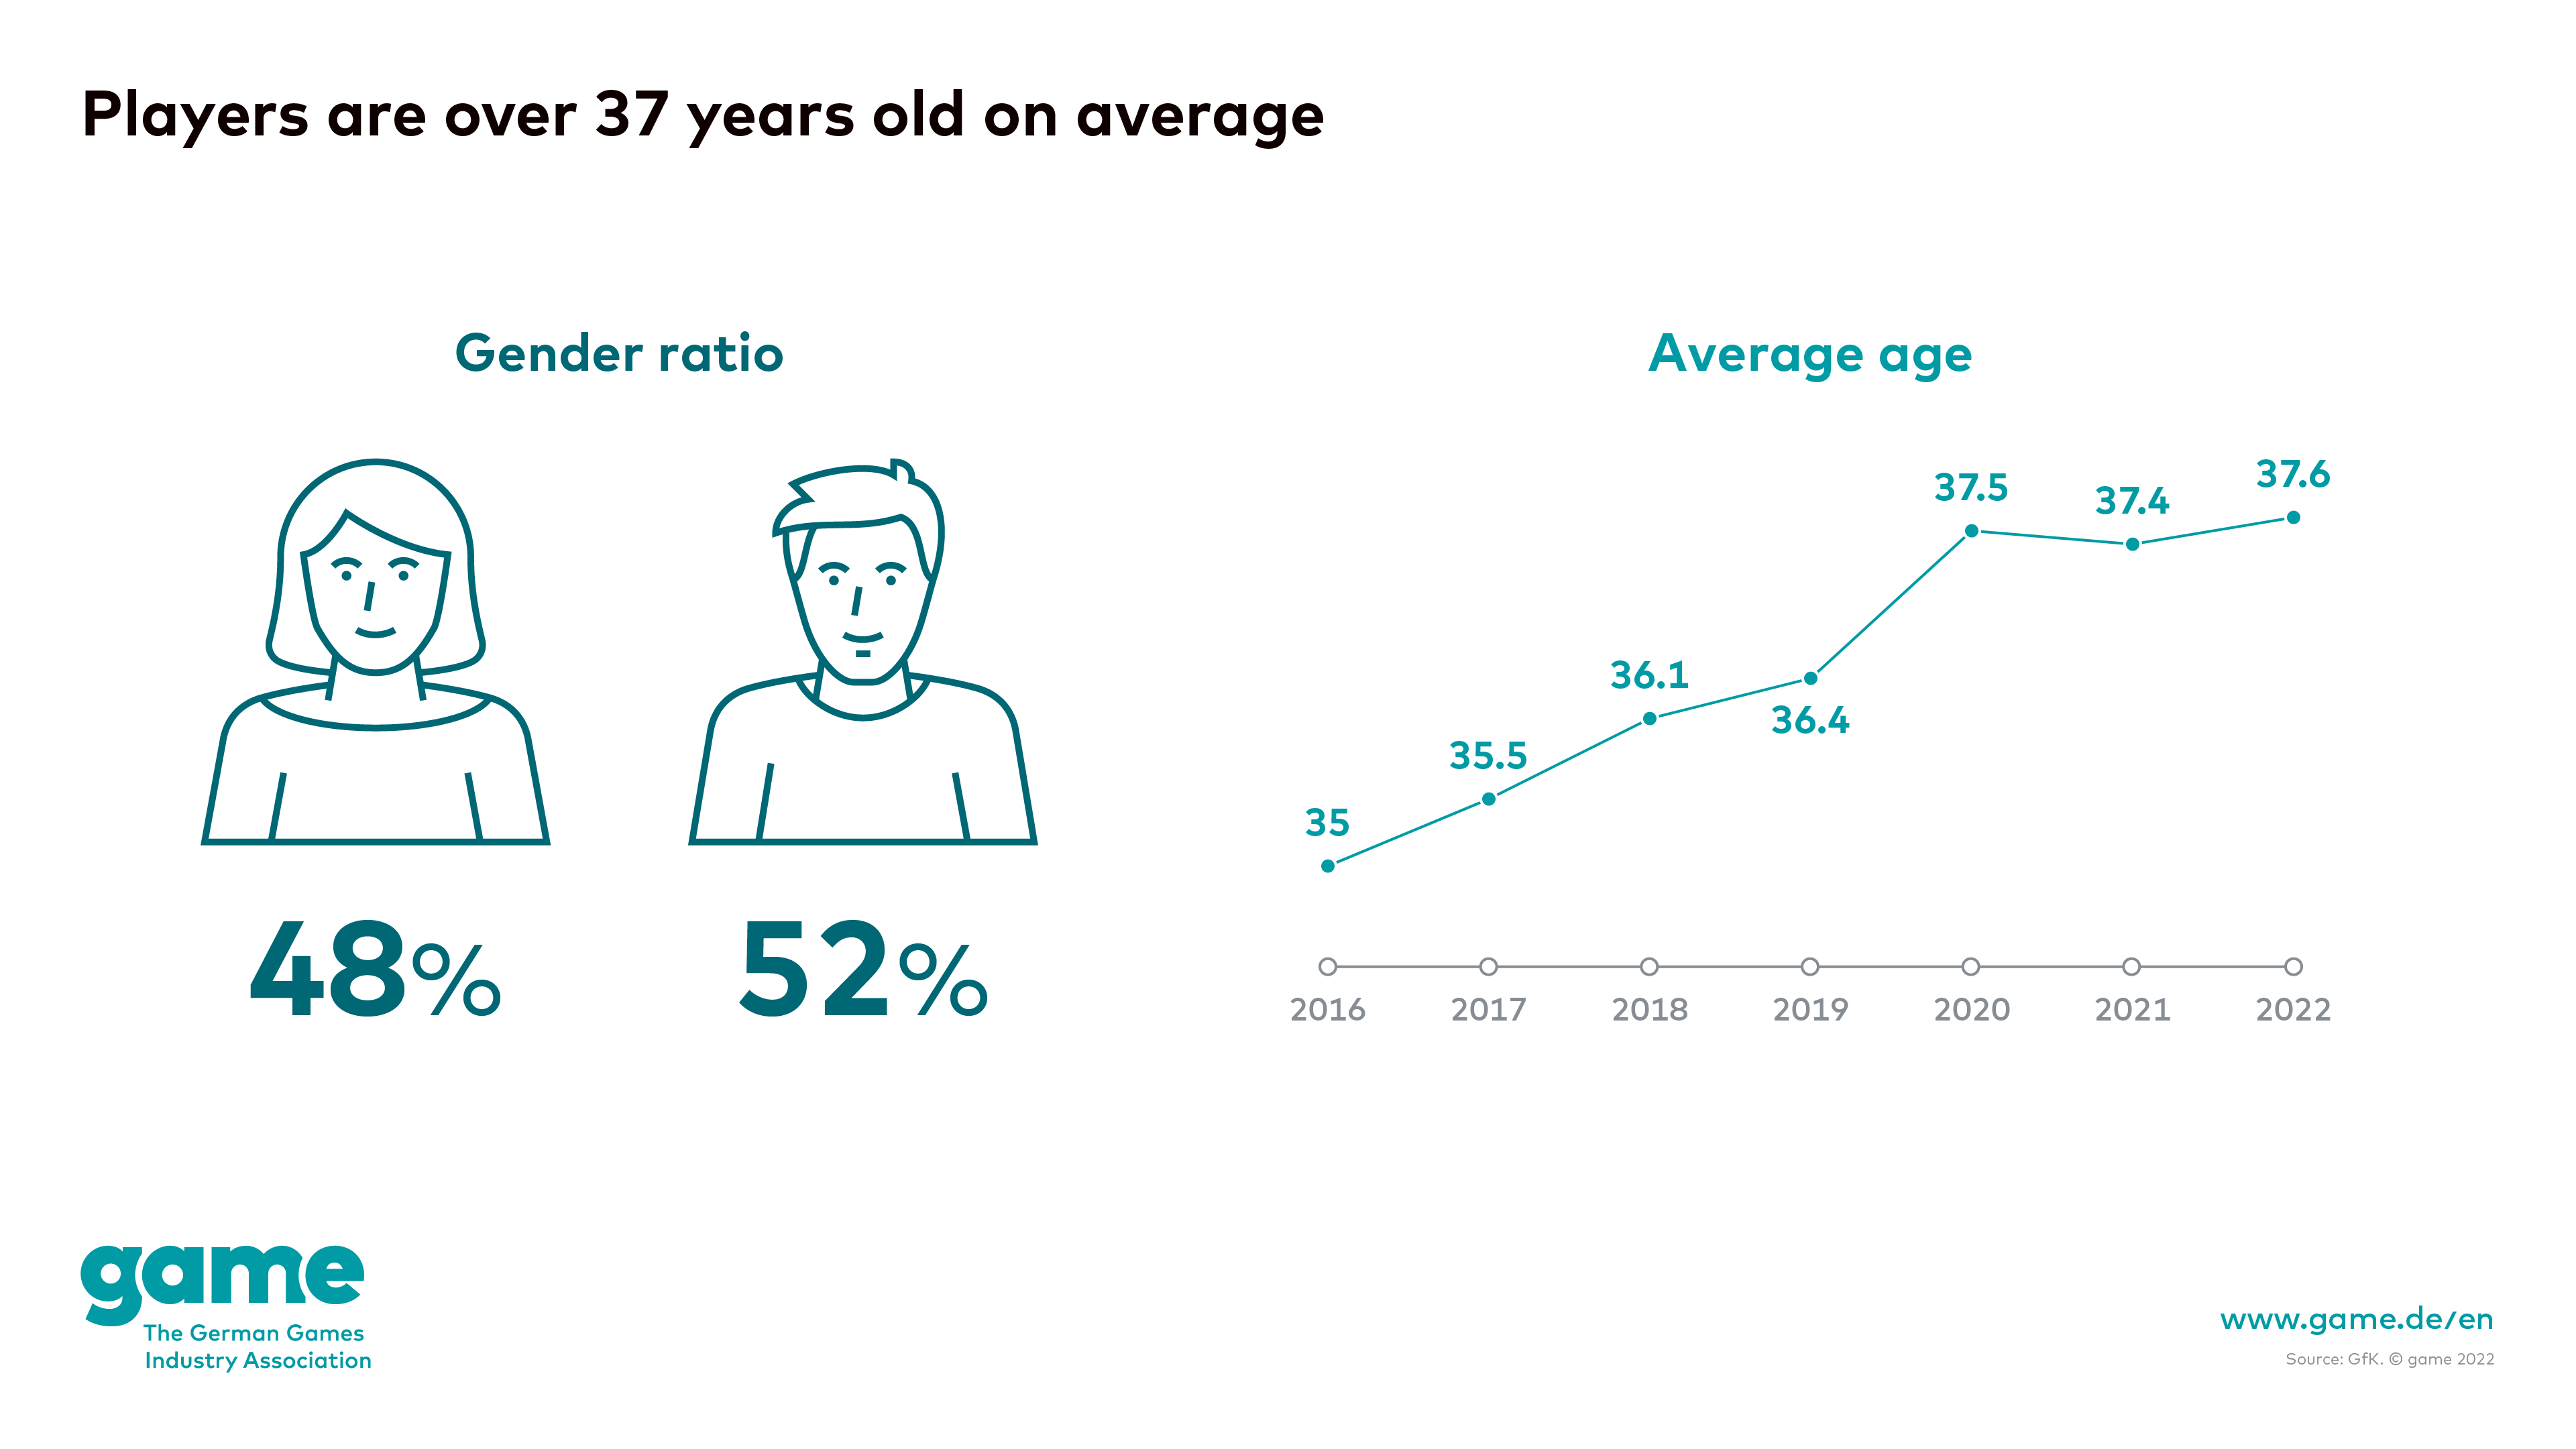 Players are over 37 years old in average